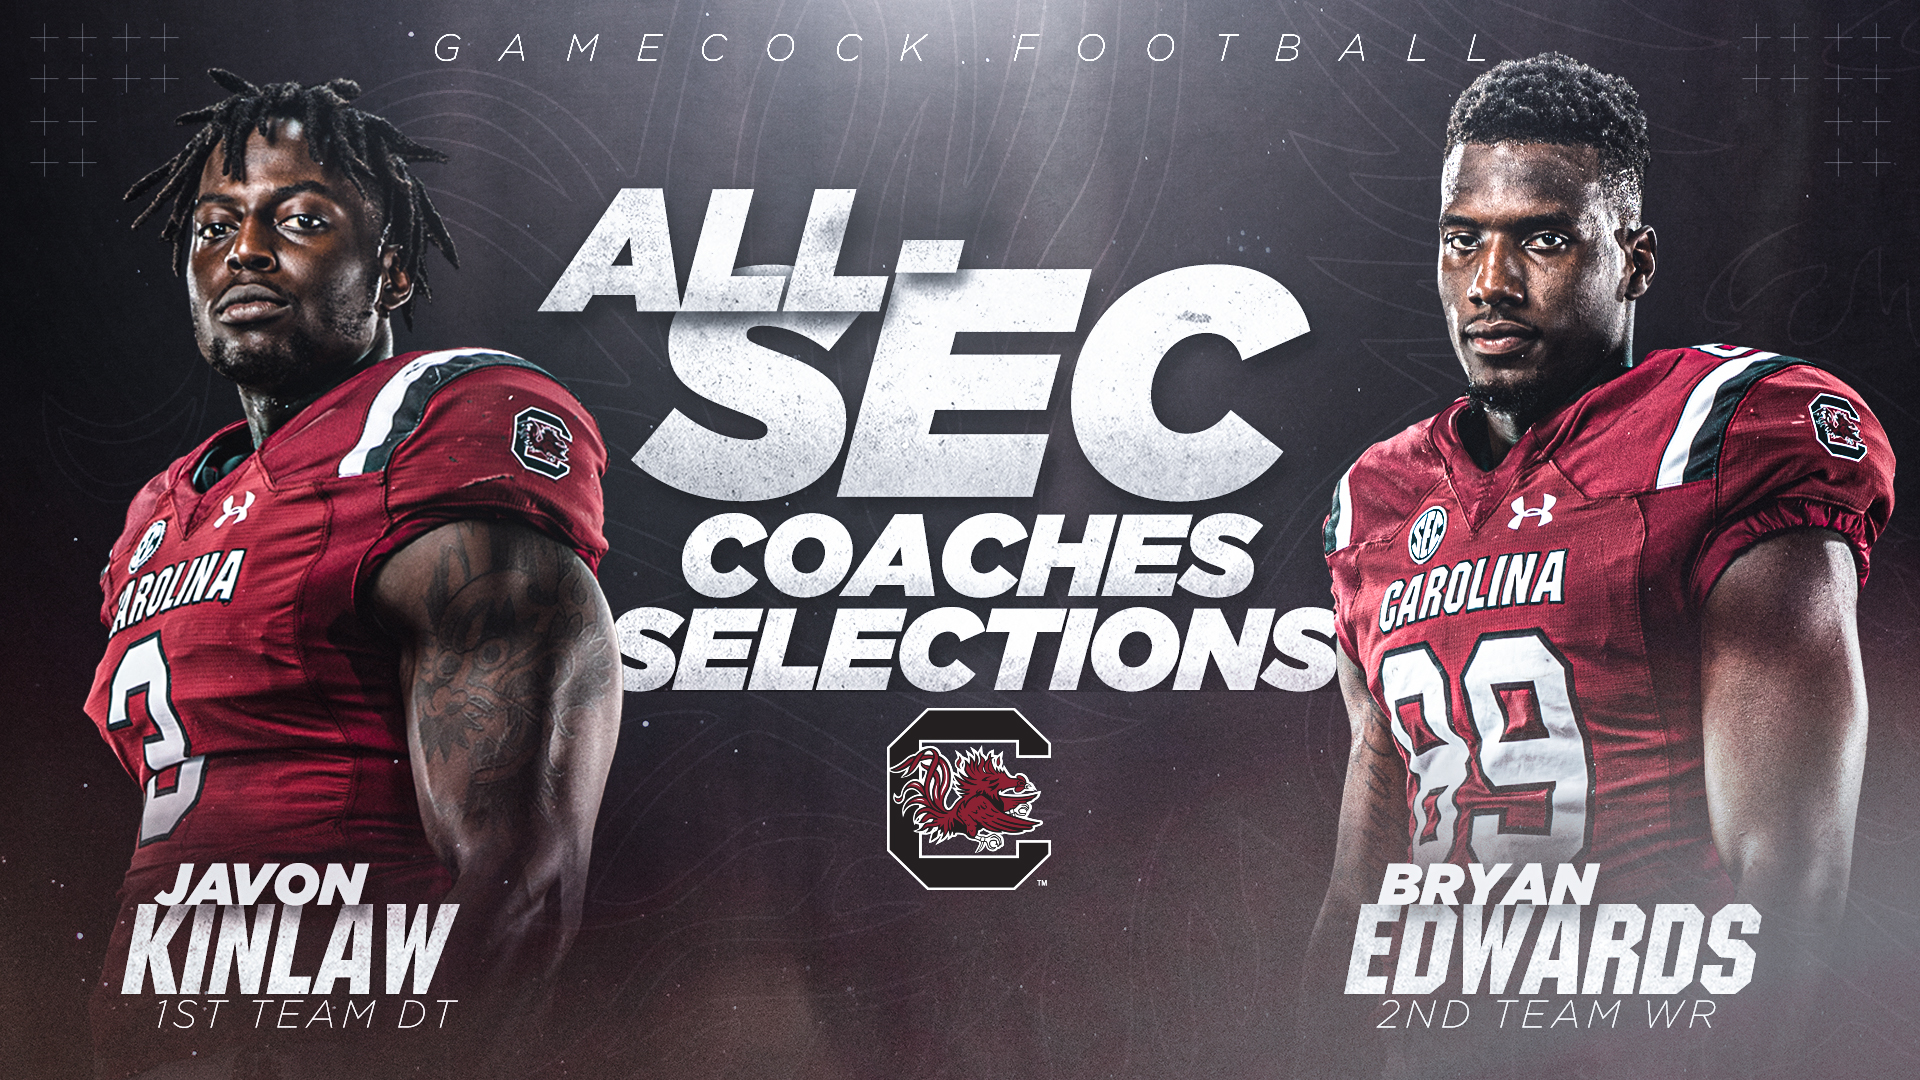 Kinlaw and Edwards Named to Coaches' All-SEC Team